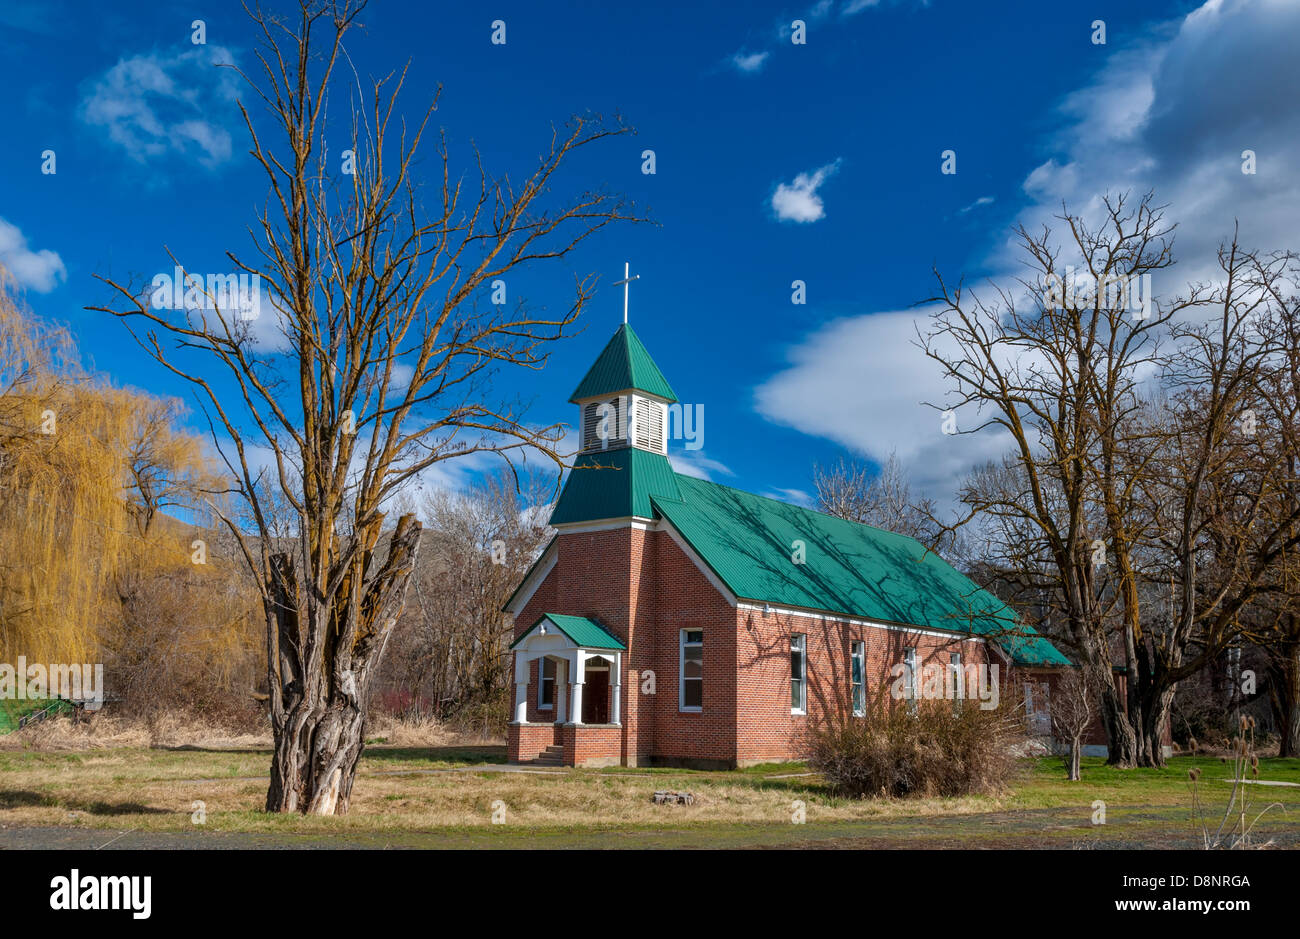 Rural country church and blue sky Stock Photo